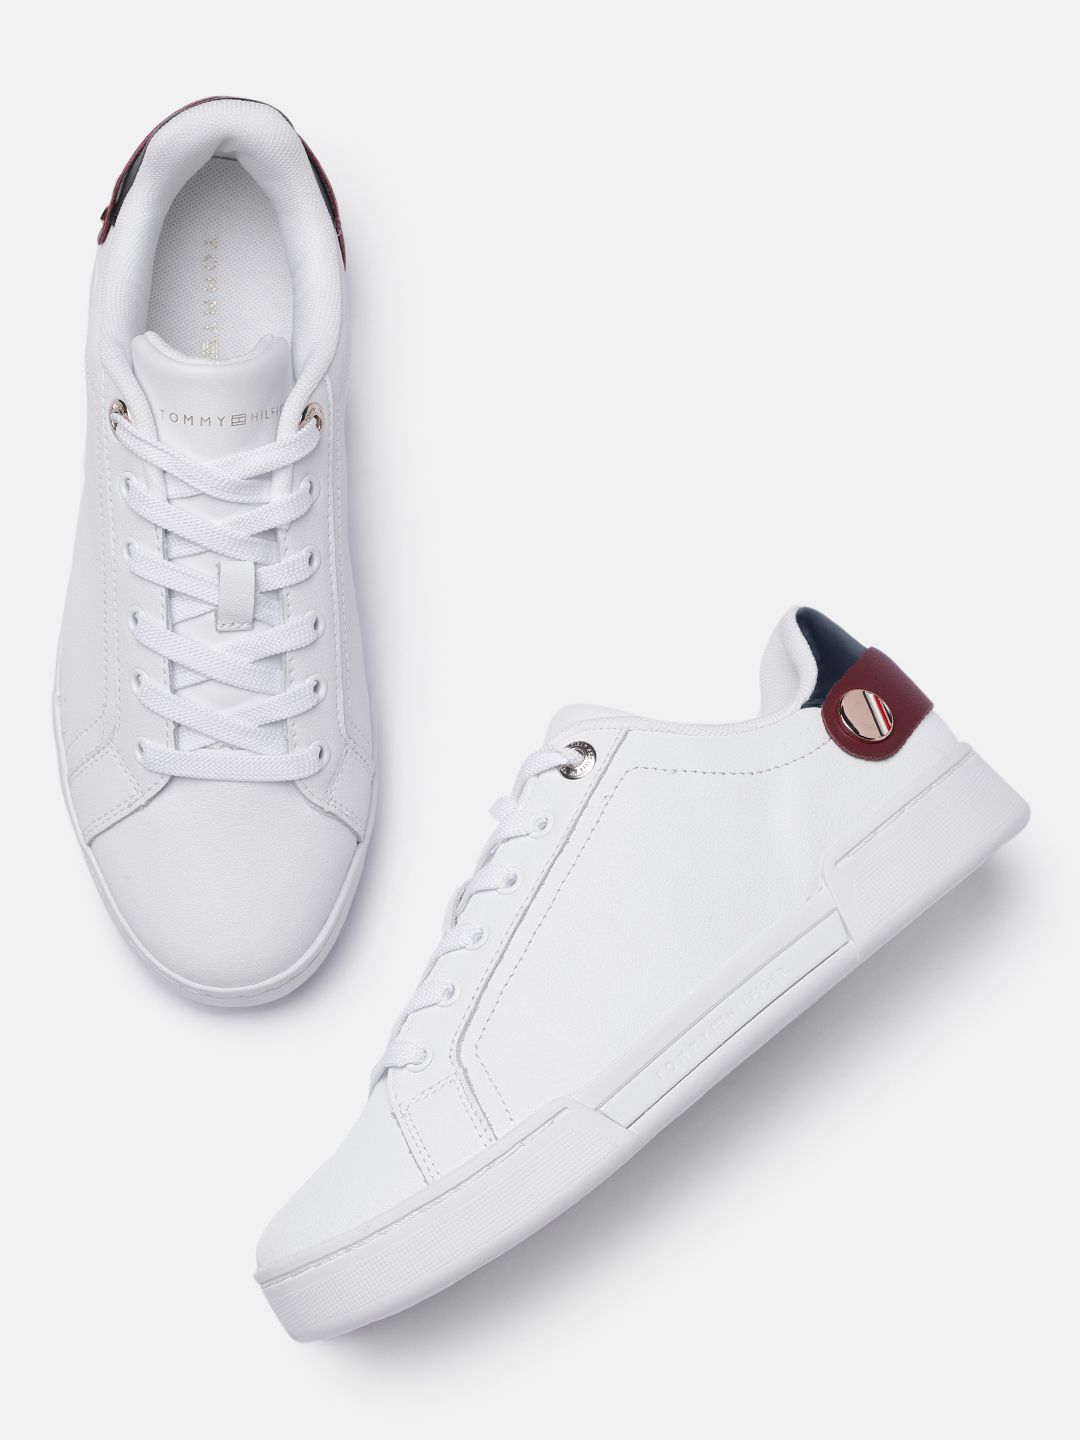 Tommy Hilfiger Women White Solid Leather Sneakers Price in India